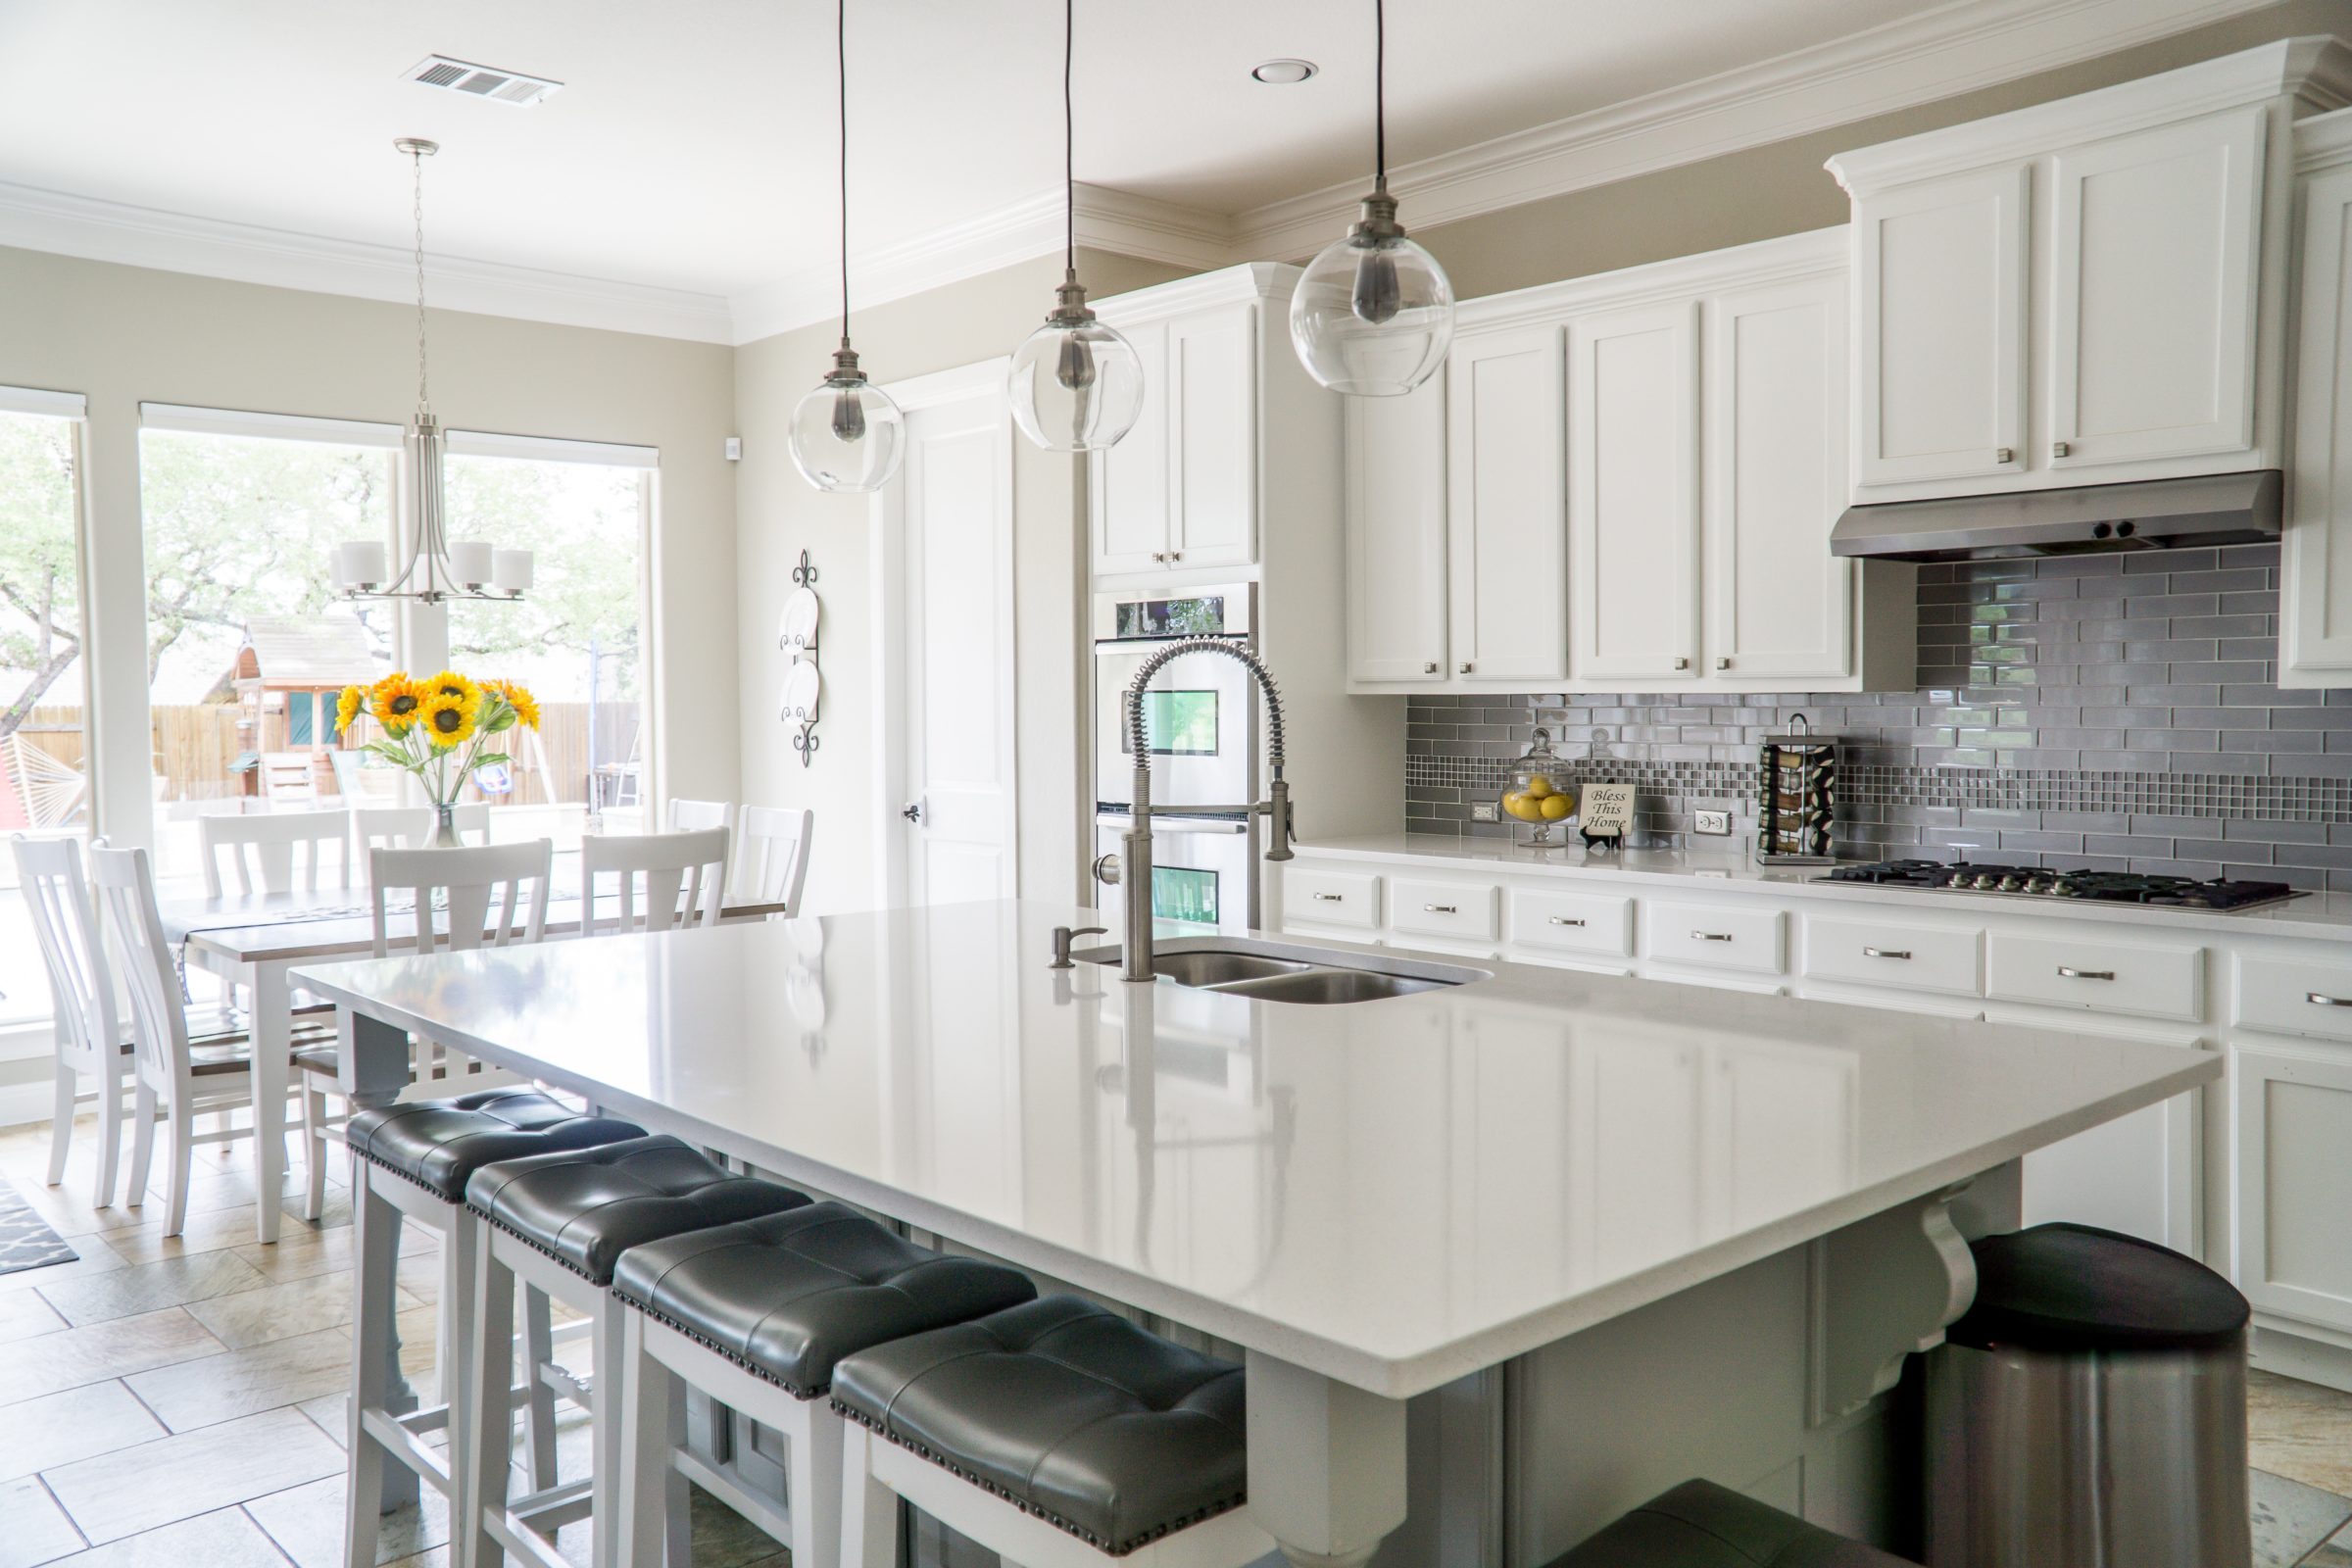 The Cost Of Remodeling A Kitchen